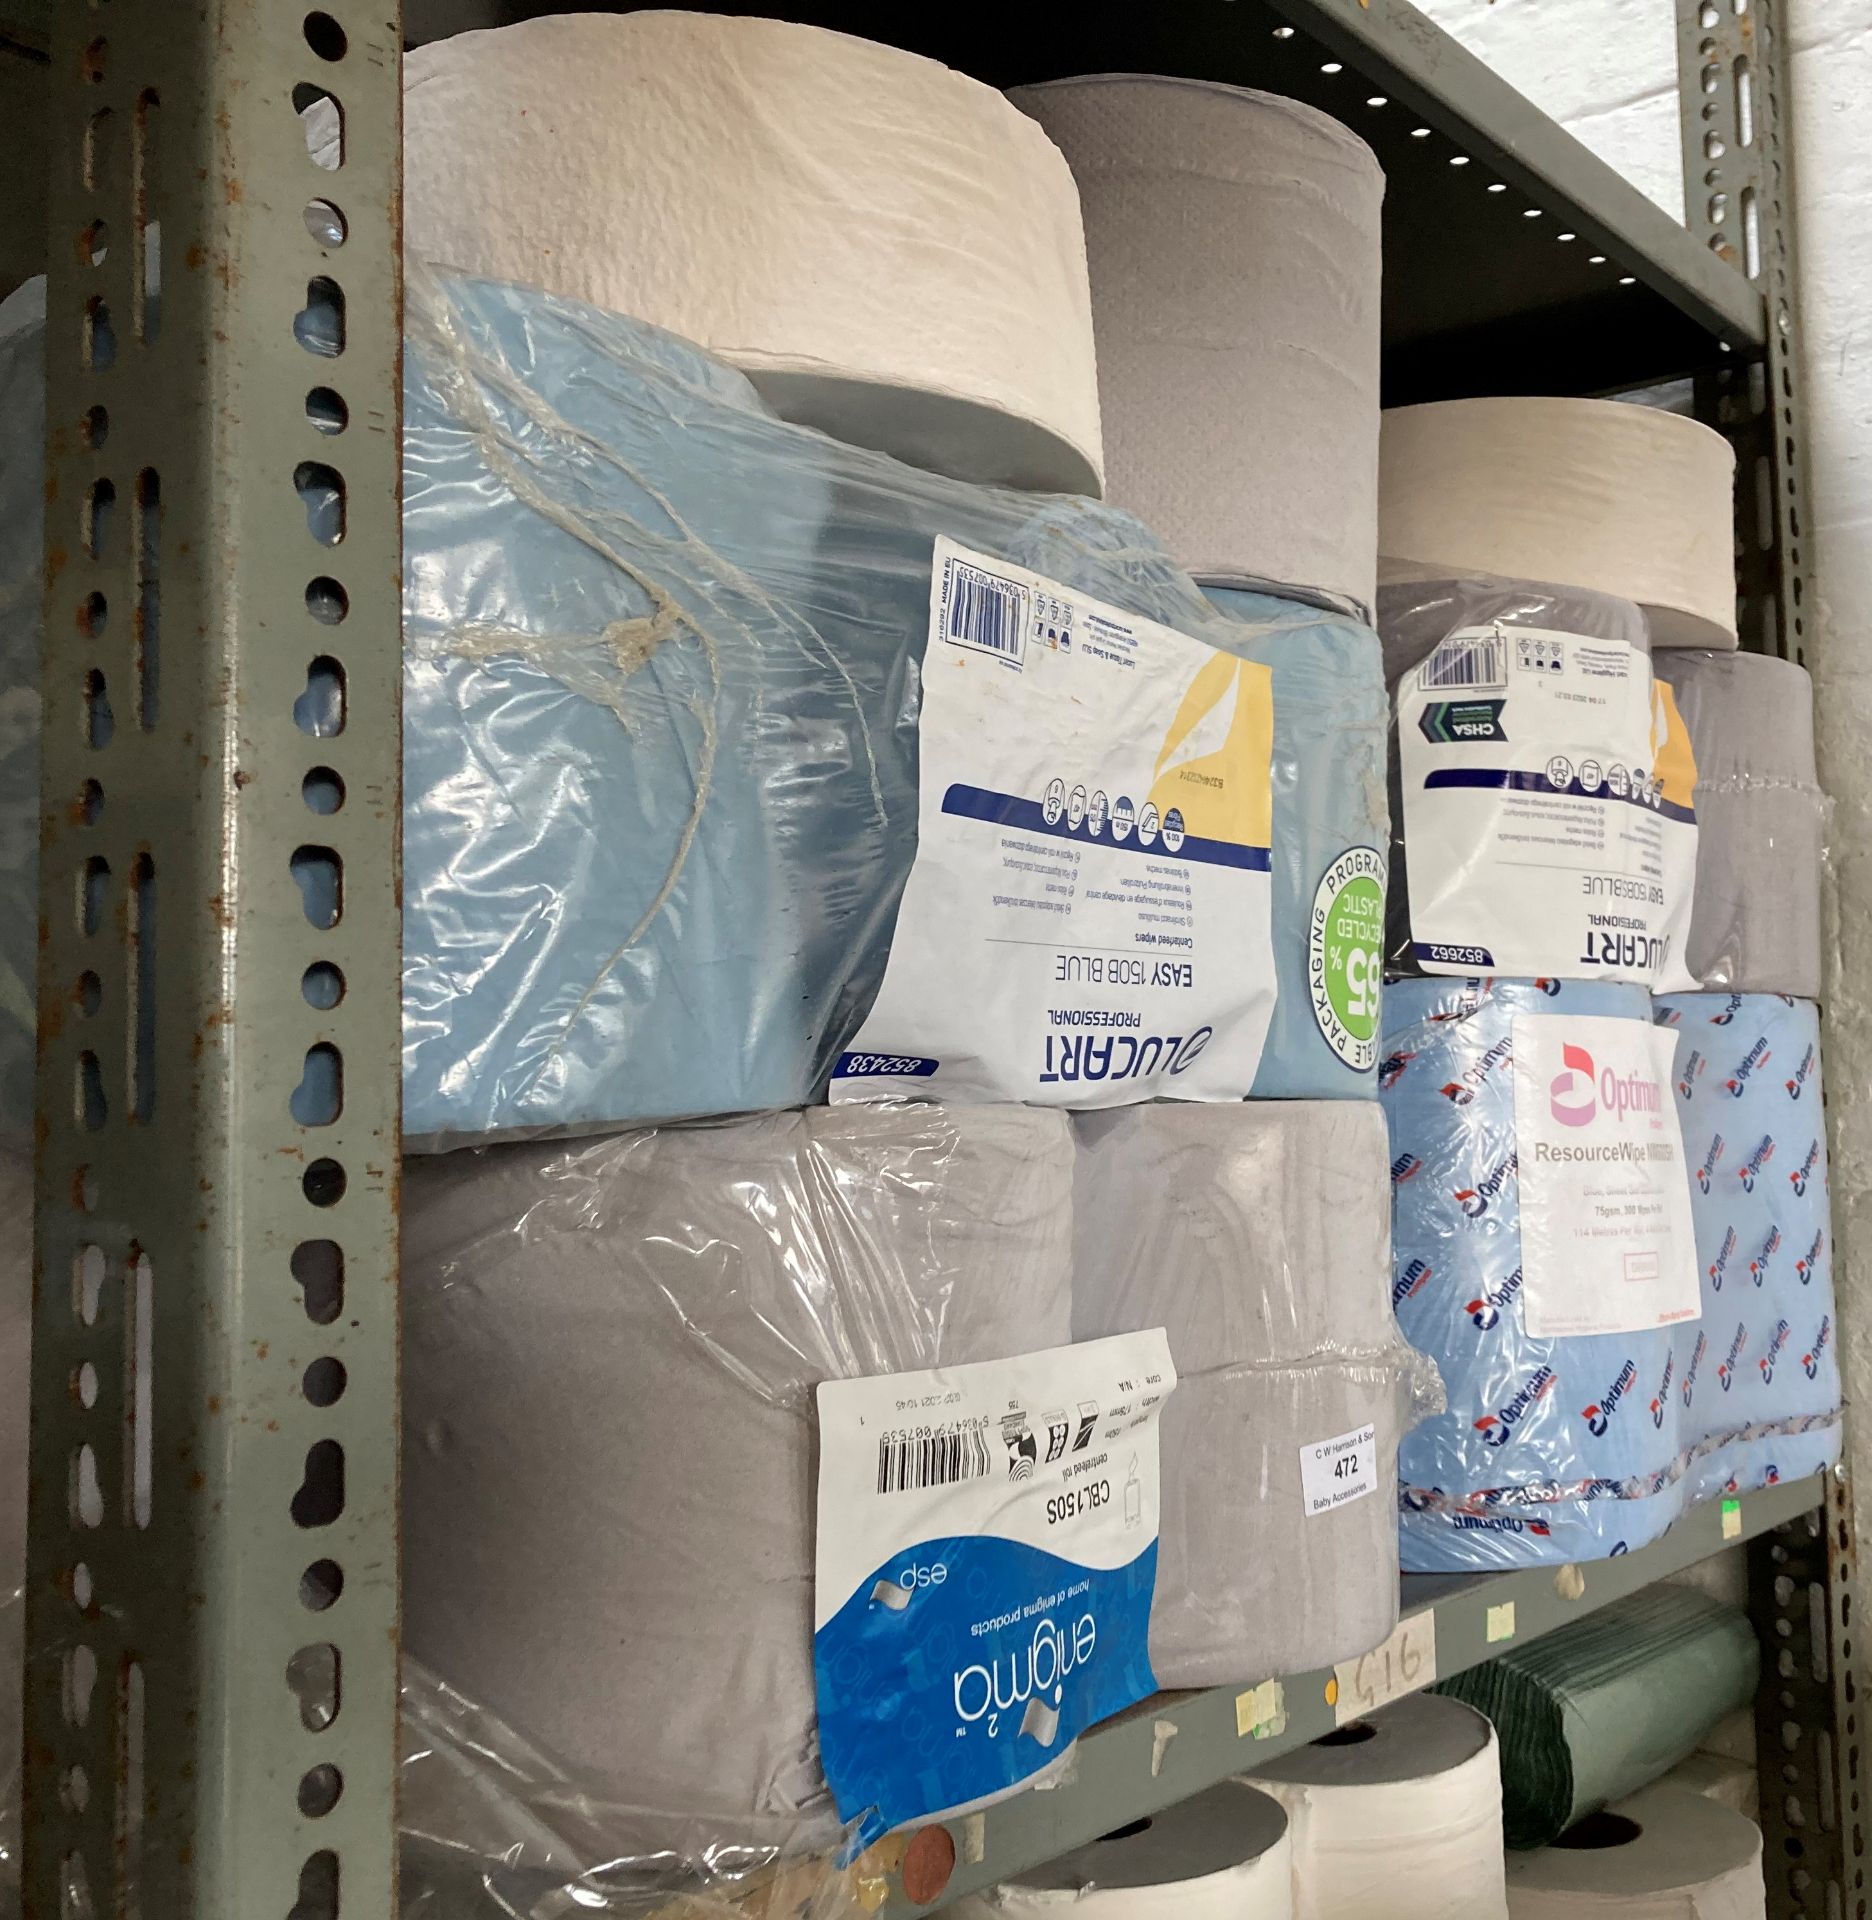 Contents to three bays - a quantity of Resource wiper rolls, - Image 2 of 4